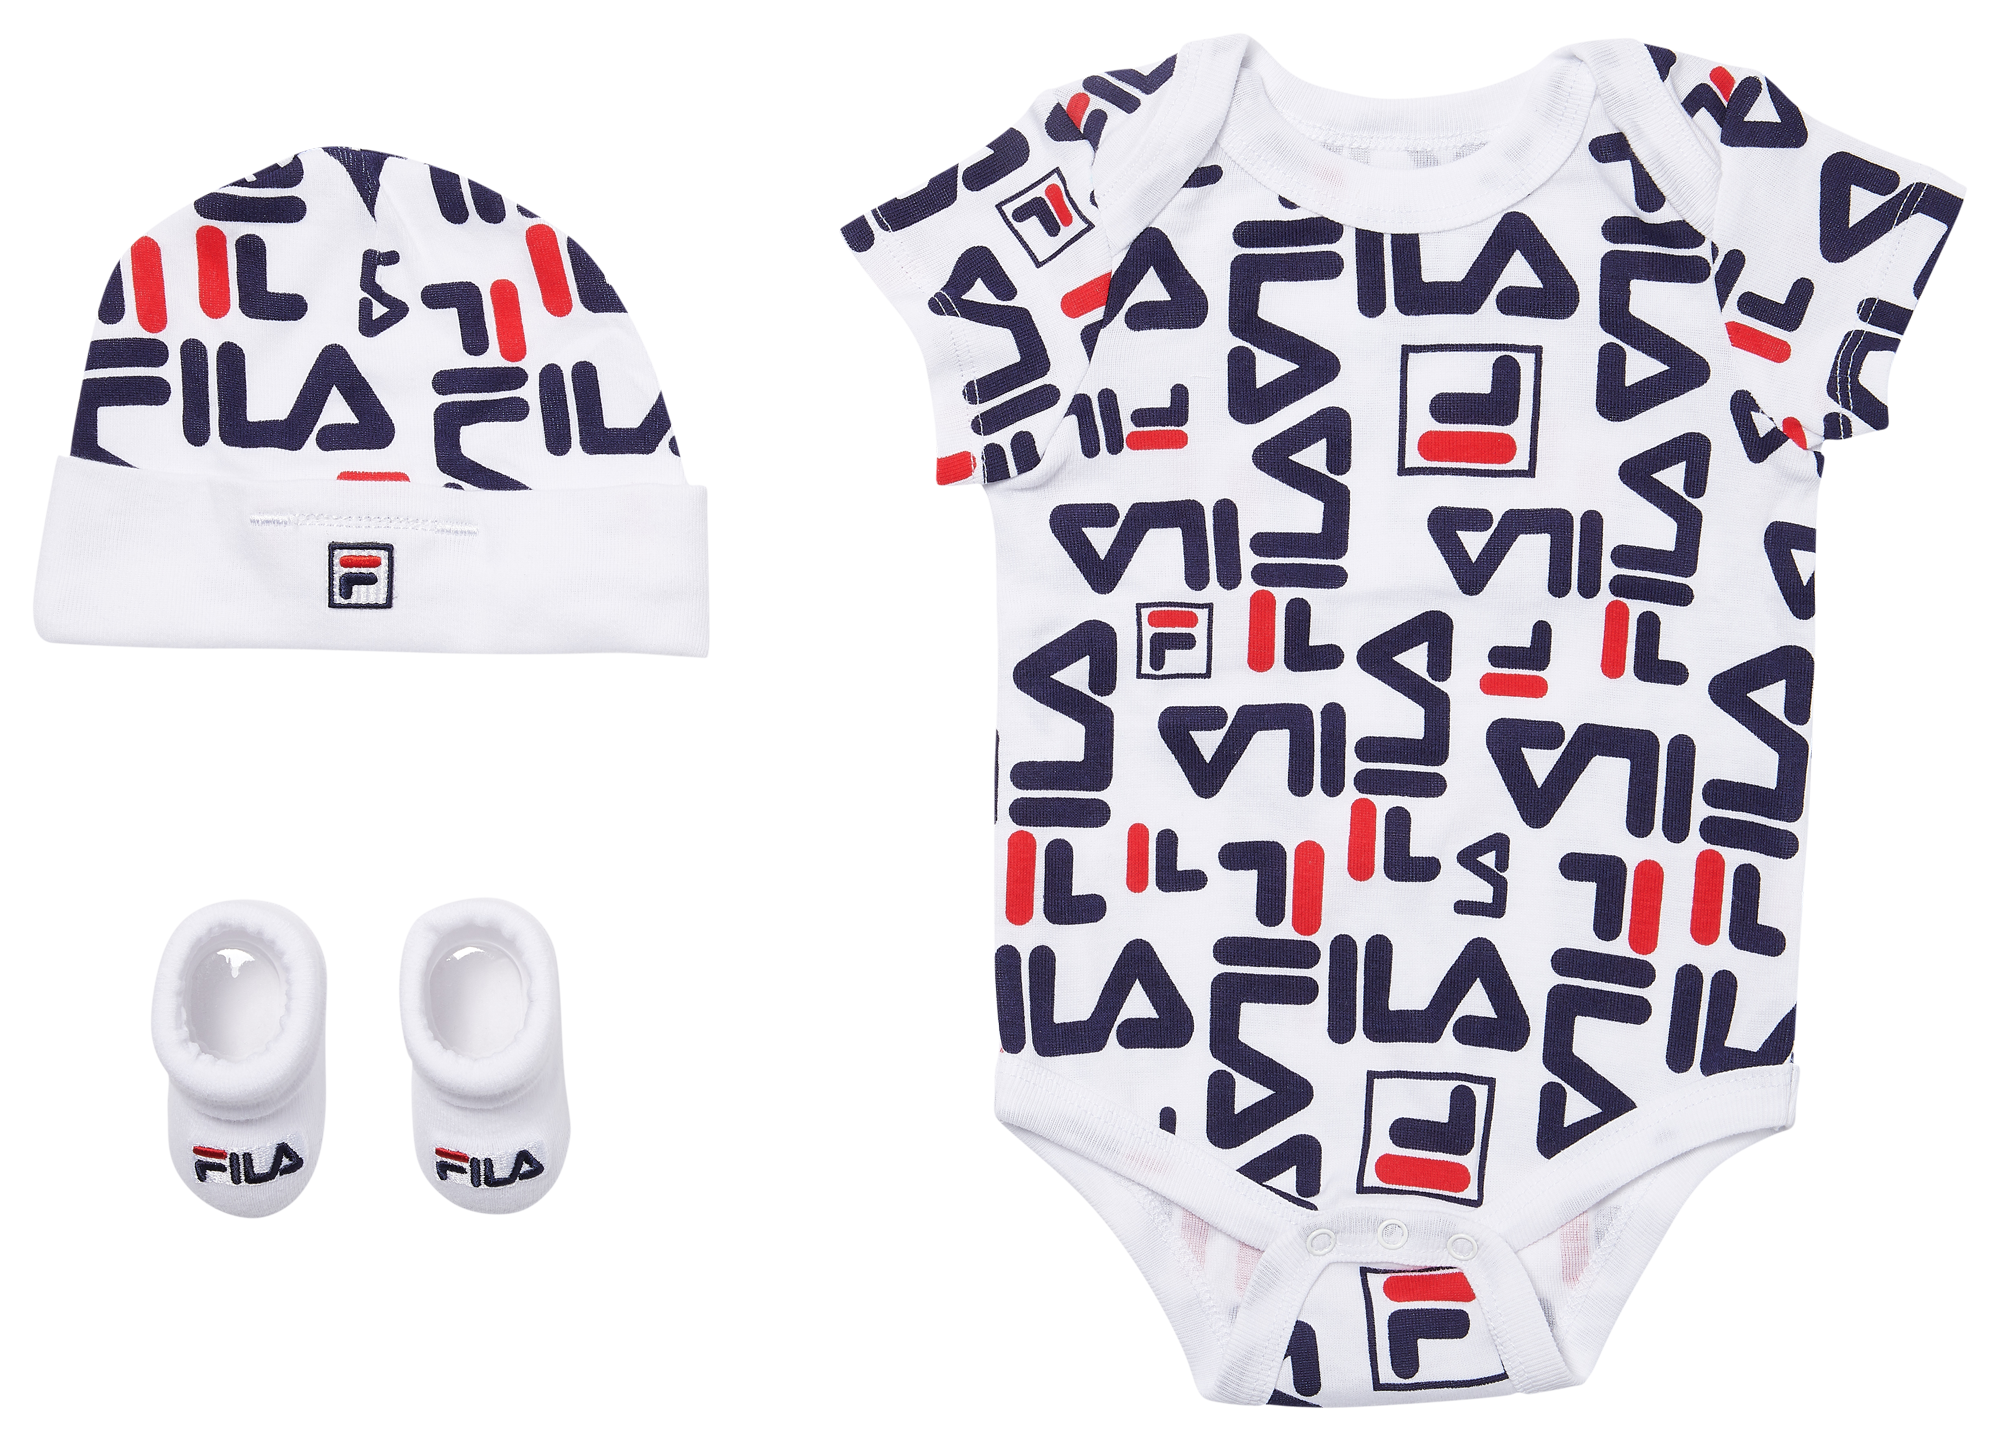 infant fila outfit